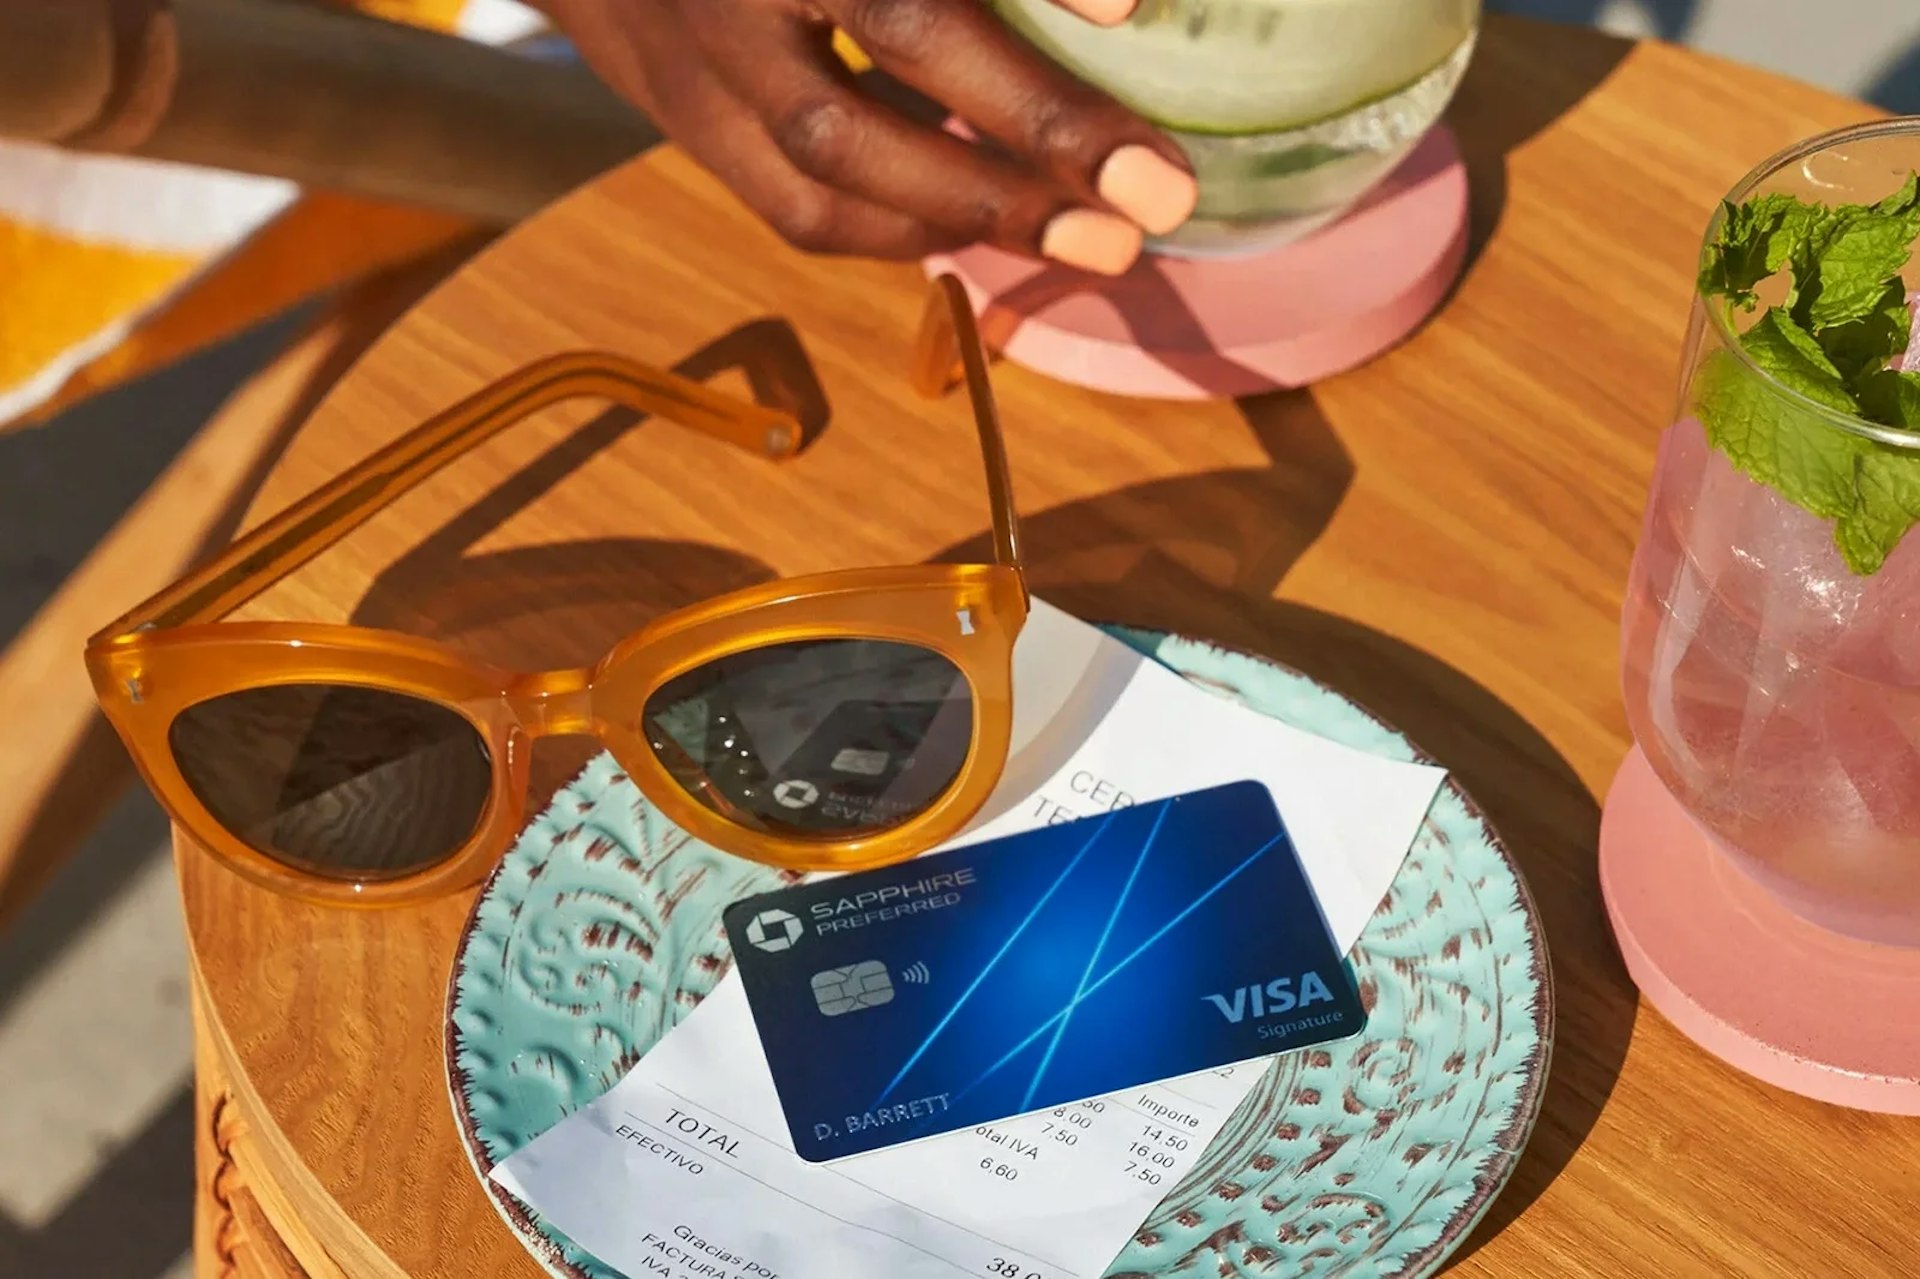 The Chase Sapphire Preferred card